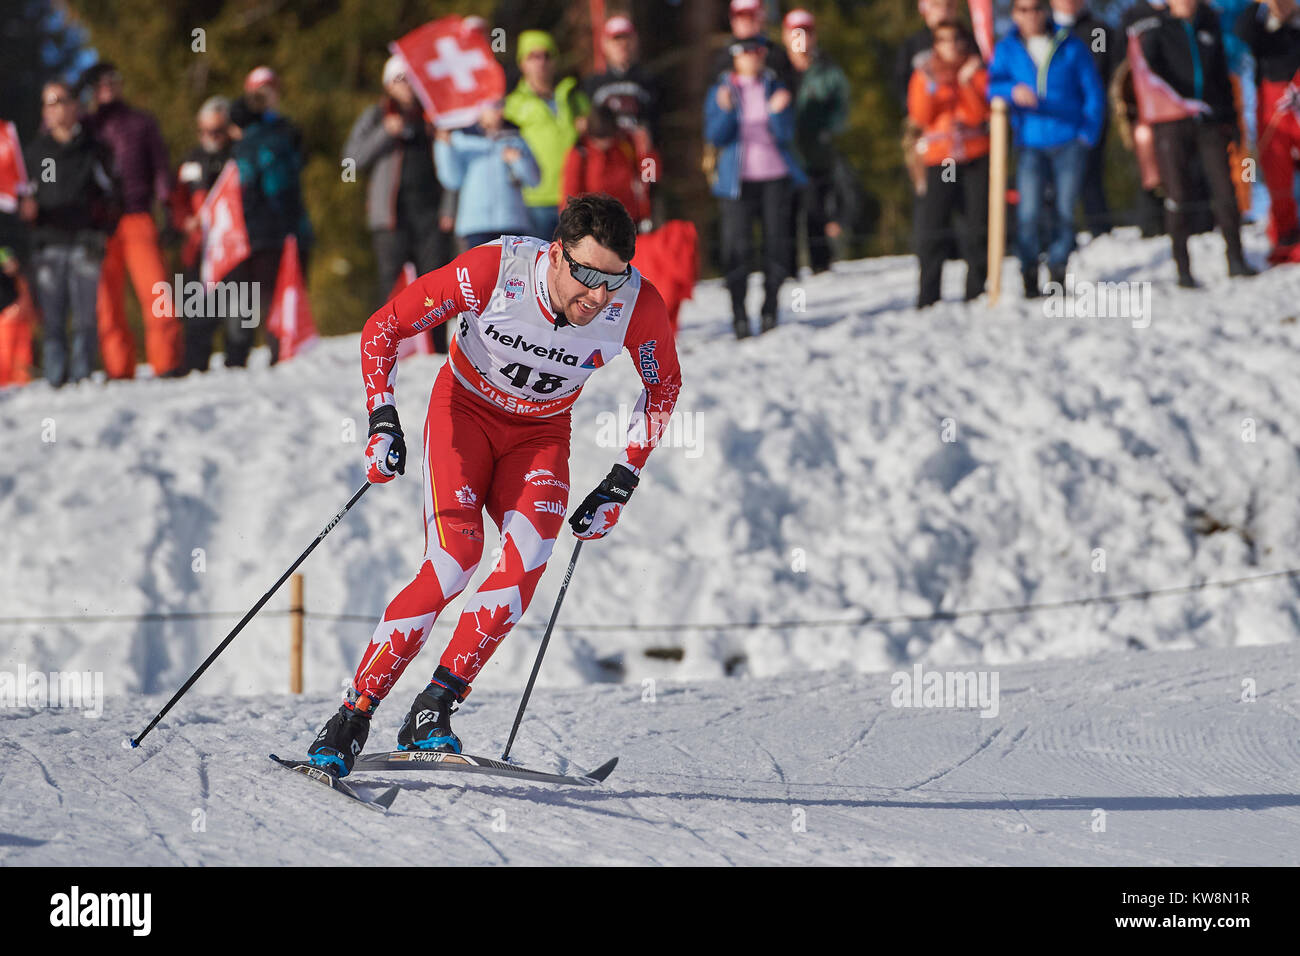 Lenzerheide, Switzerland, 31st December 2017. HARVEY Alex (CAN) during the Mens 15 km Classic Competition at the FIS Cross Country World Cup Tour de Ski 2017 in Lenzerheide. Photo: Cronos/Rolf Simeon Stock Photo